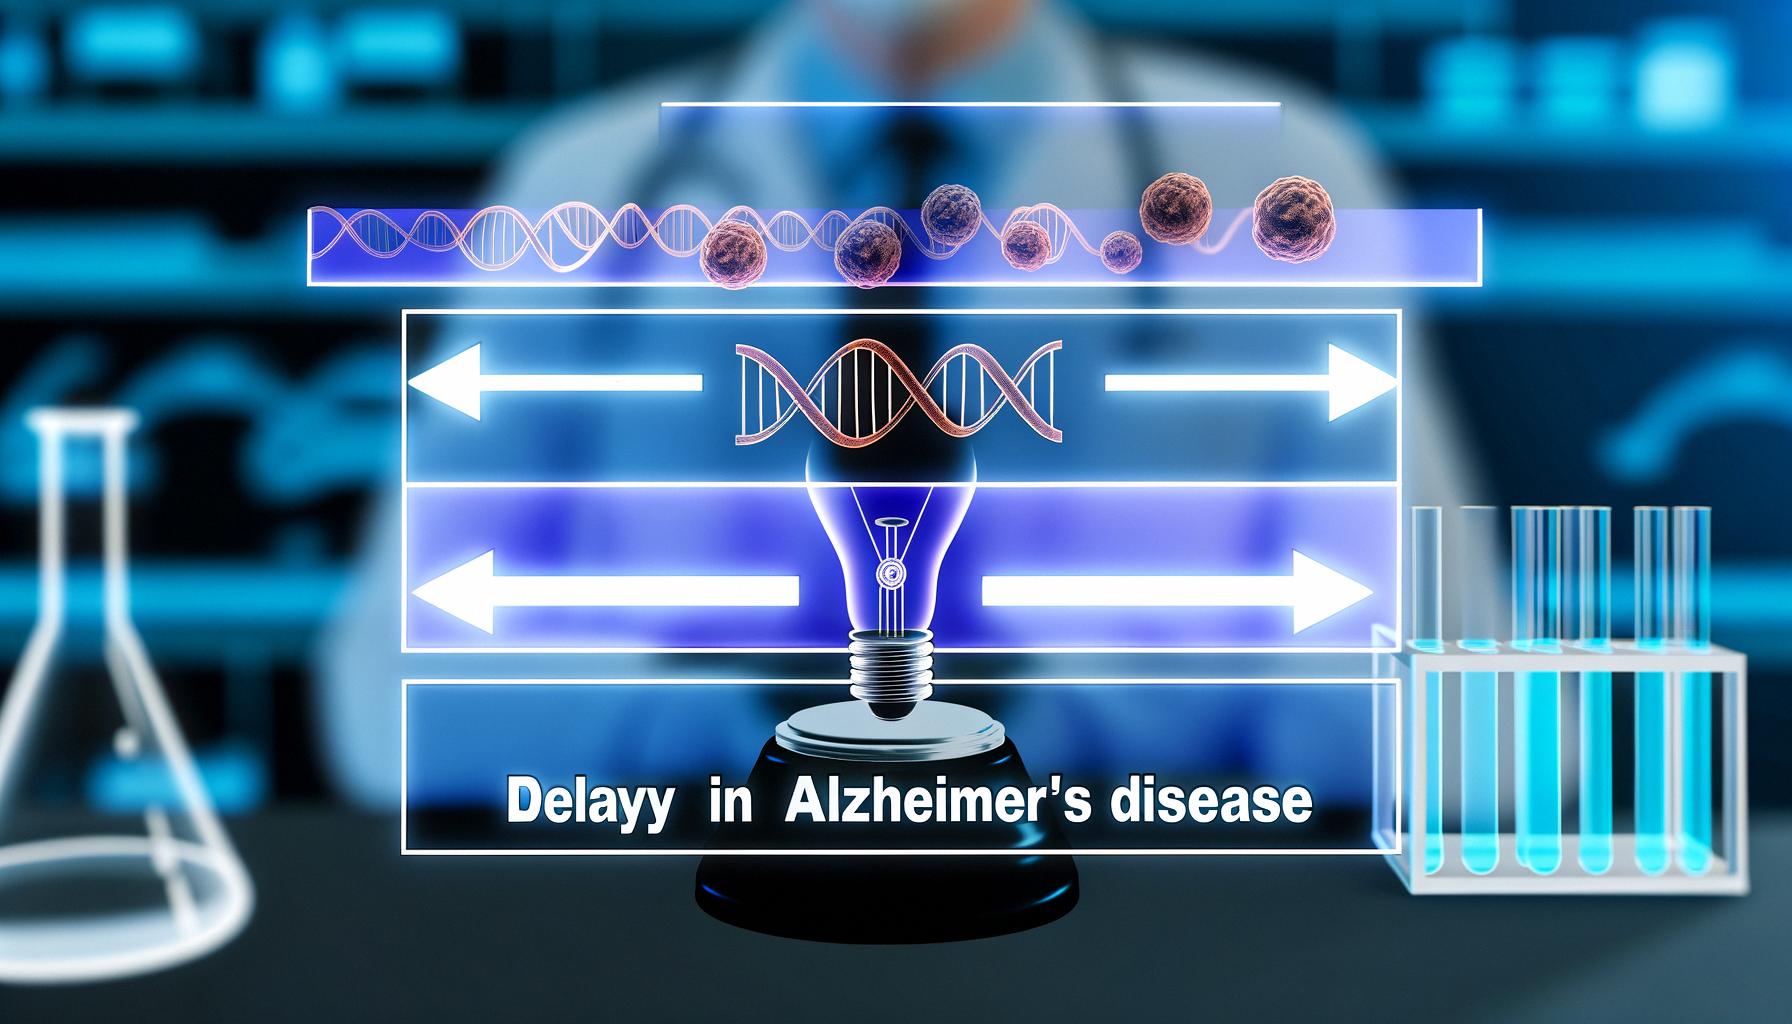 Genetic and AI advances show promise in delaying and predicting Alzheimer's onset.